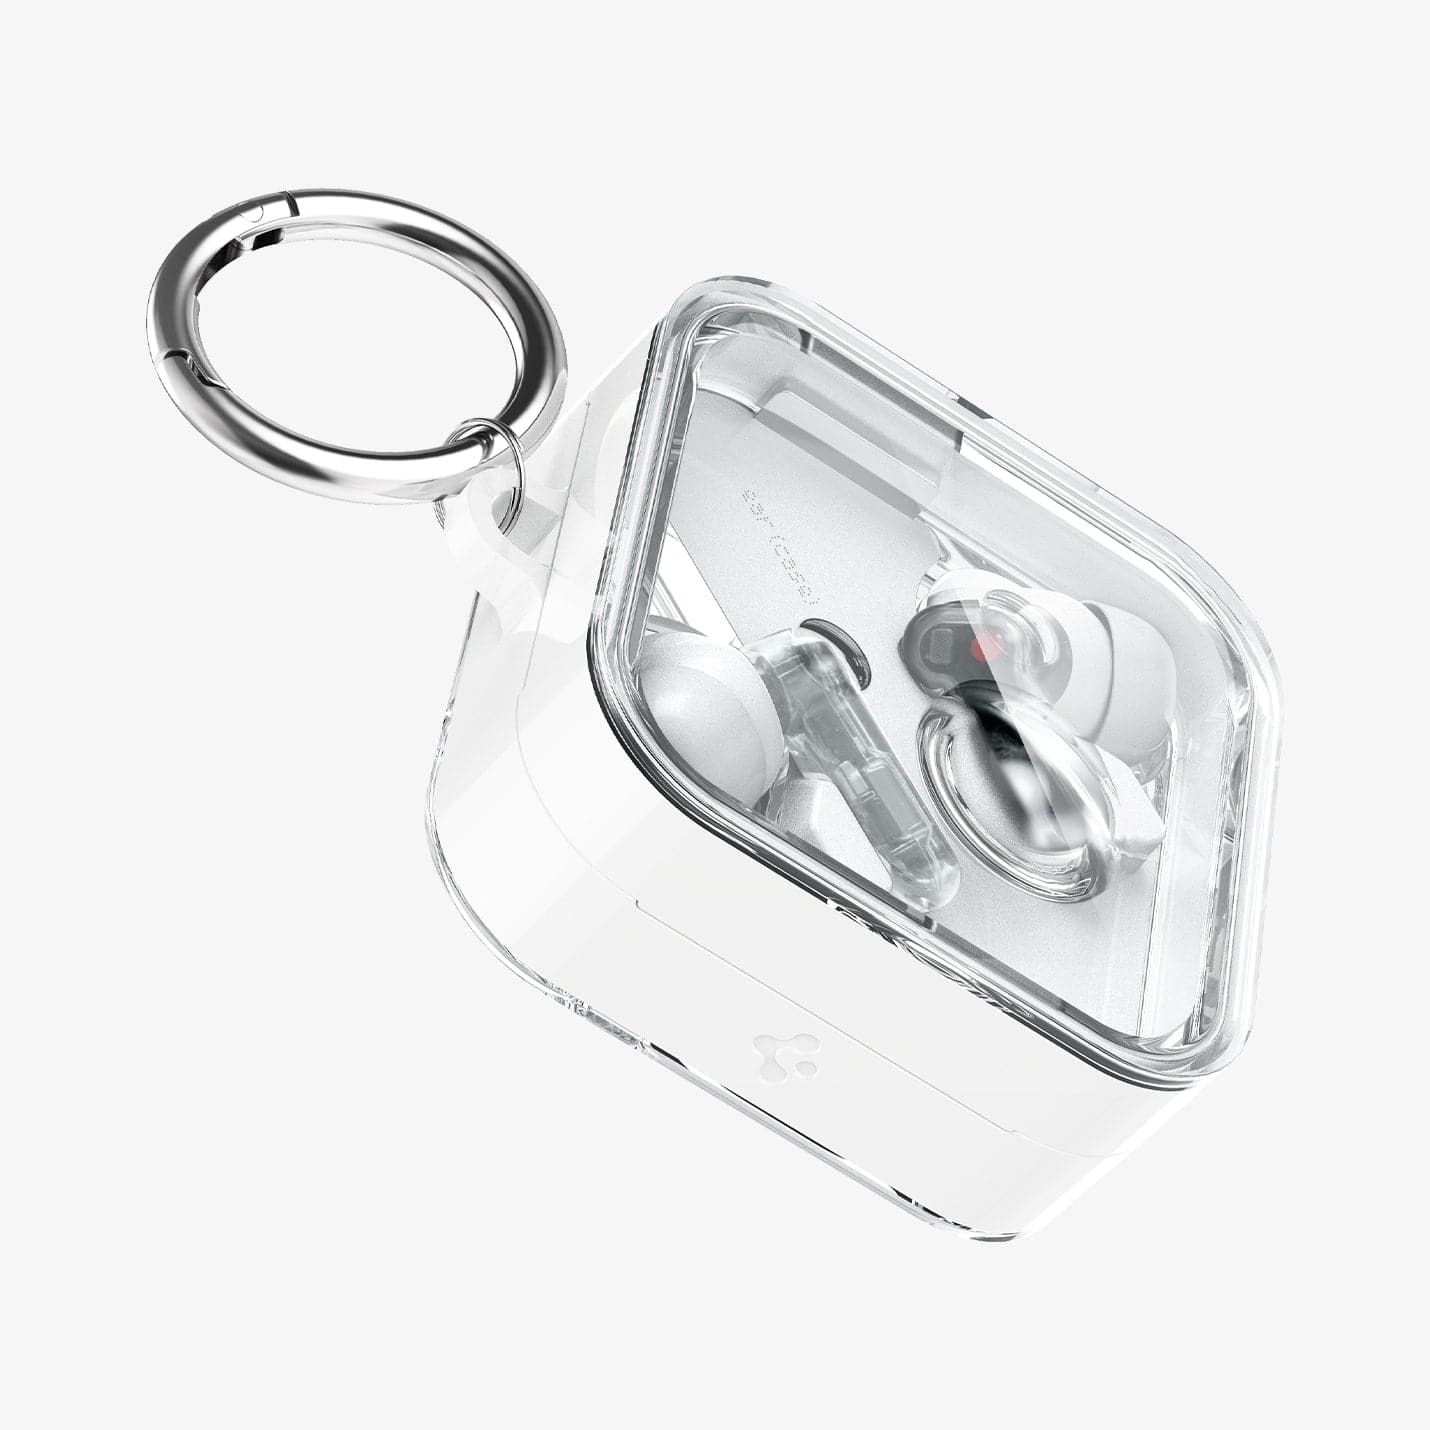 ACS06434 - Nothing Ear (2) Case Ultra Hybrid in jet white showing the top, front and partial side with carabiner